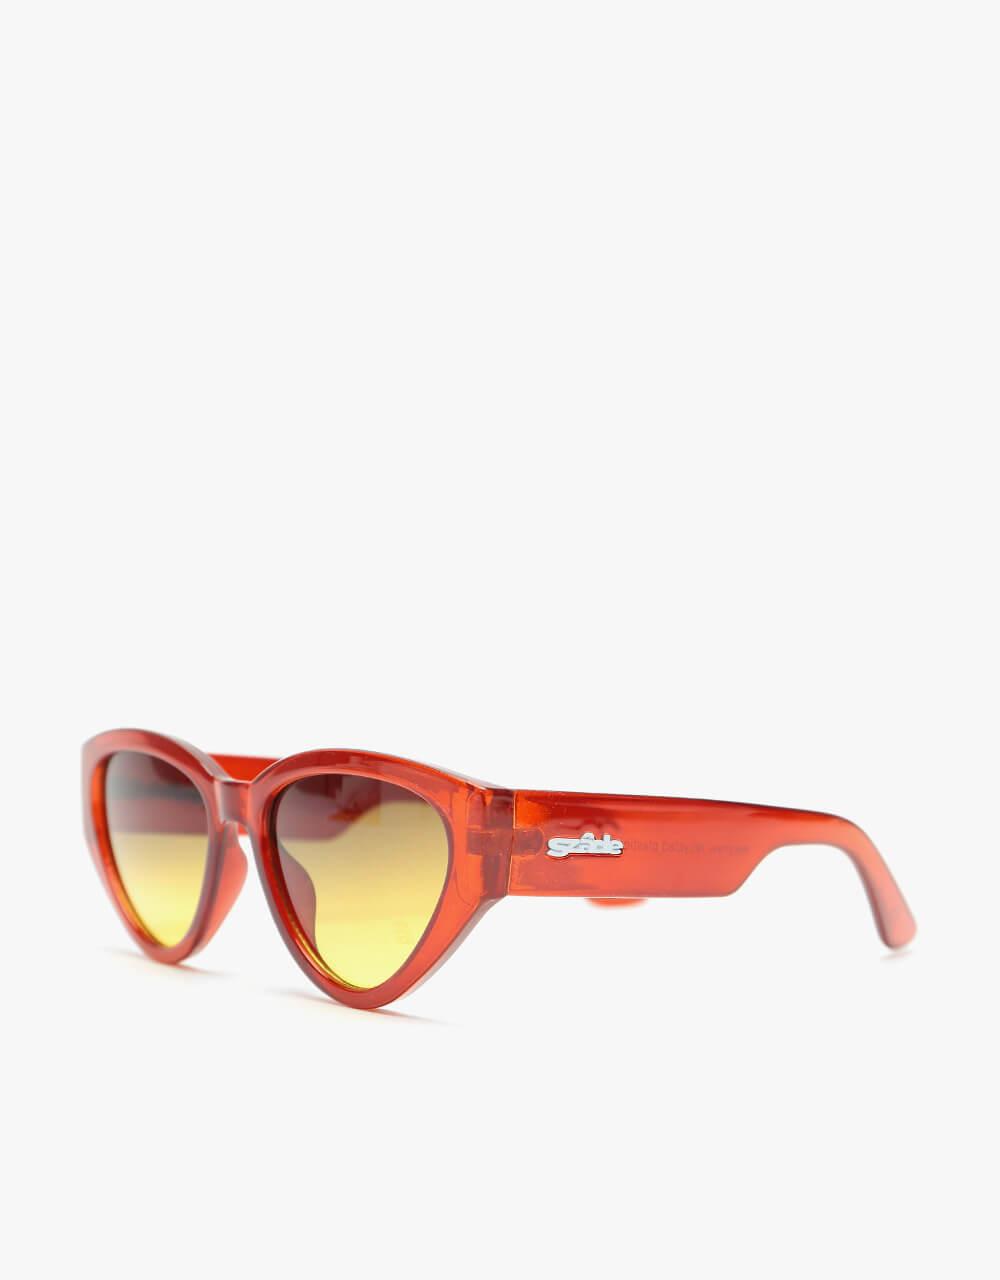 Szade Kershaw Recycled Sunglasses - Blood Plum/Unmellow Yellow